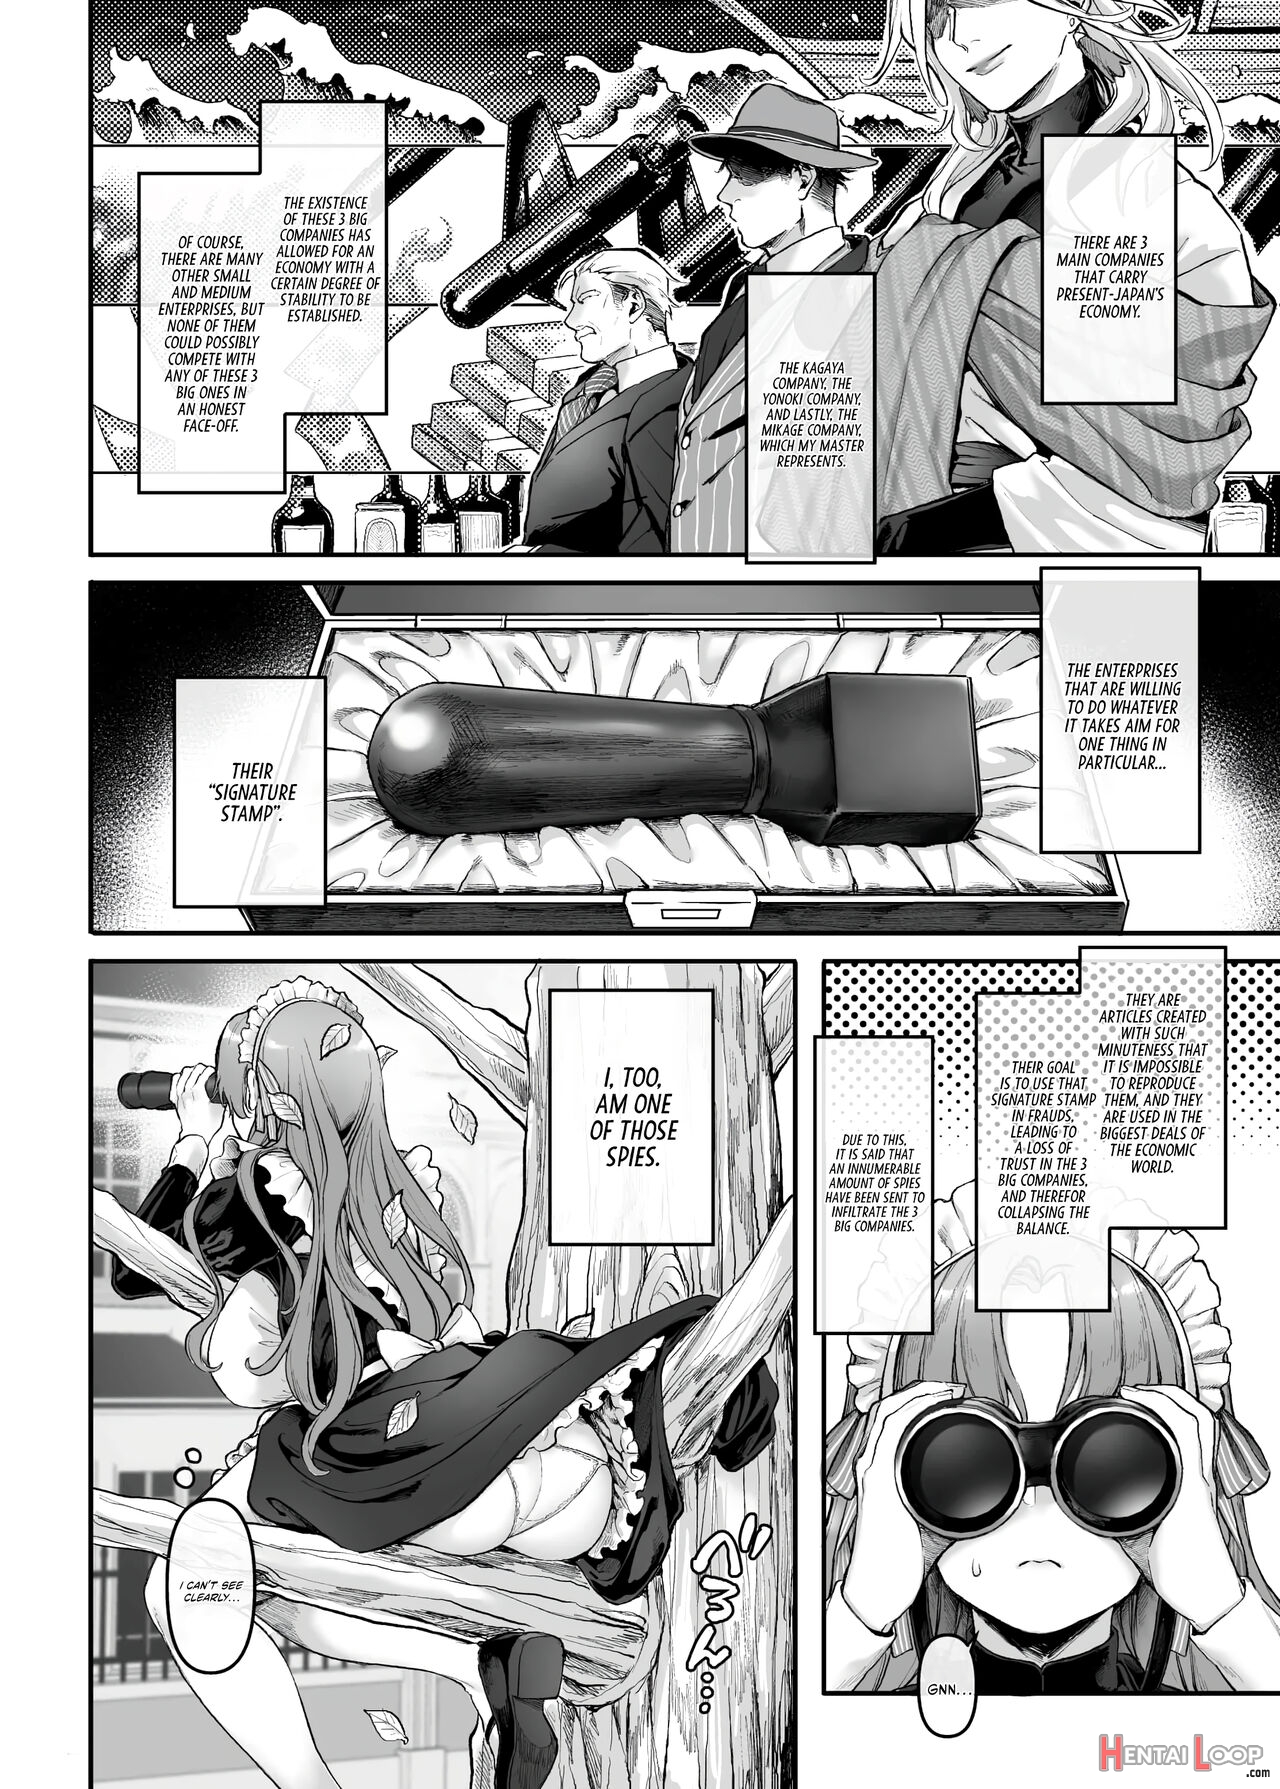 Infiltrate! Debt Repayment Rta Of A Spy On The Brink ~the Crossdressing Maid And The Oni Boss~ page 9